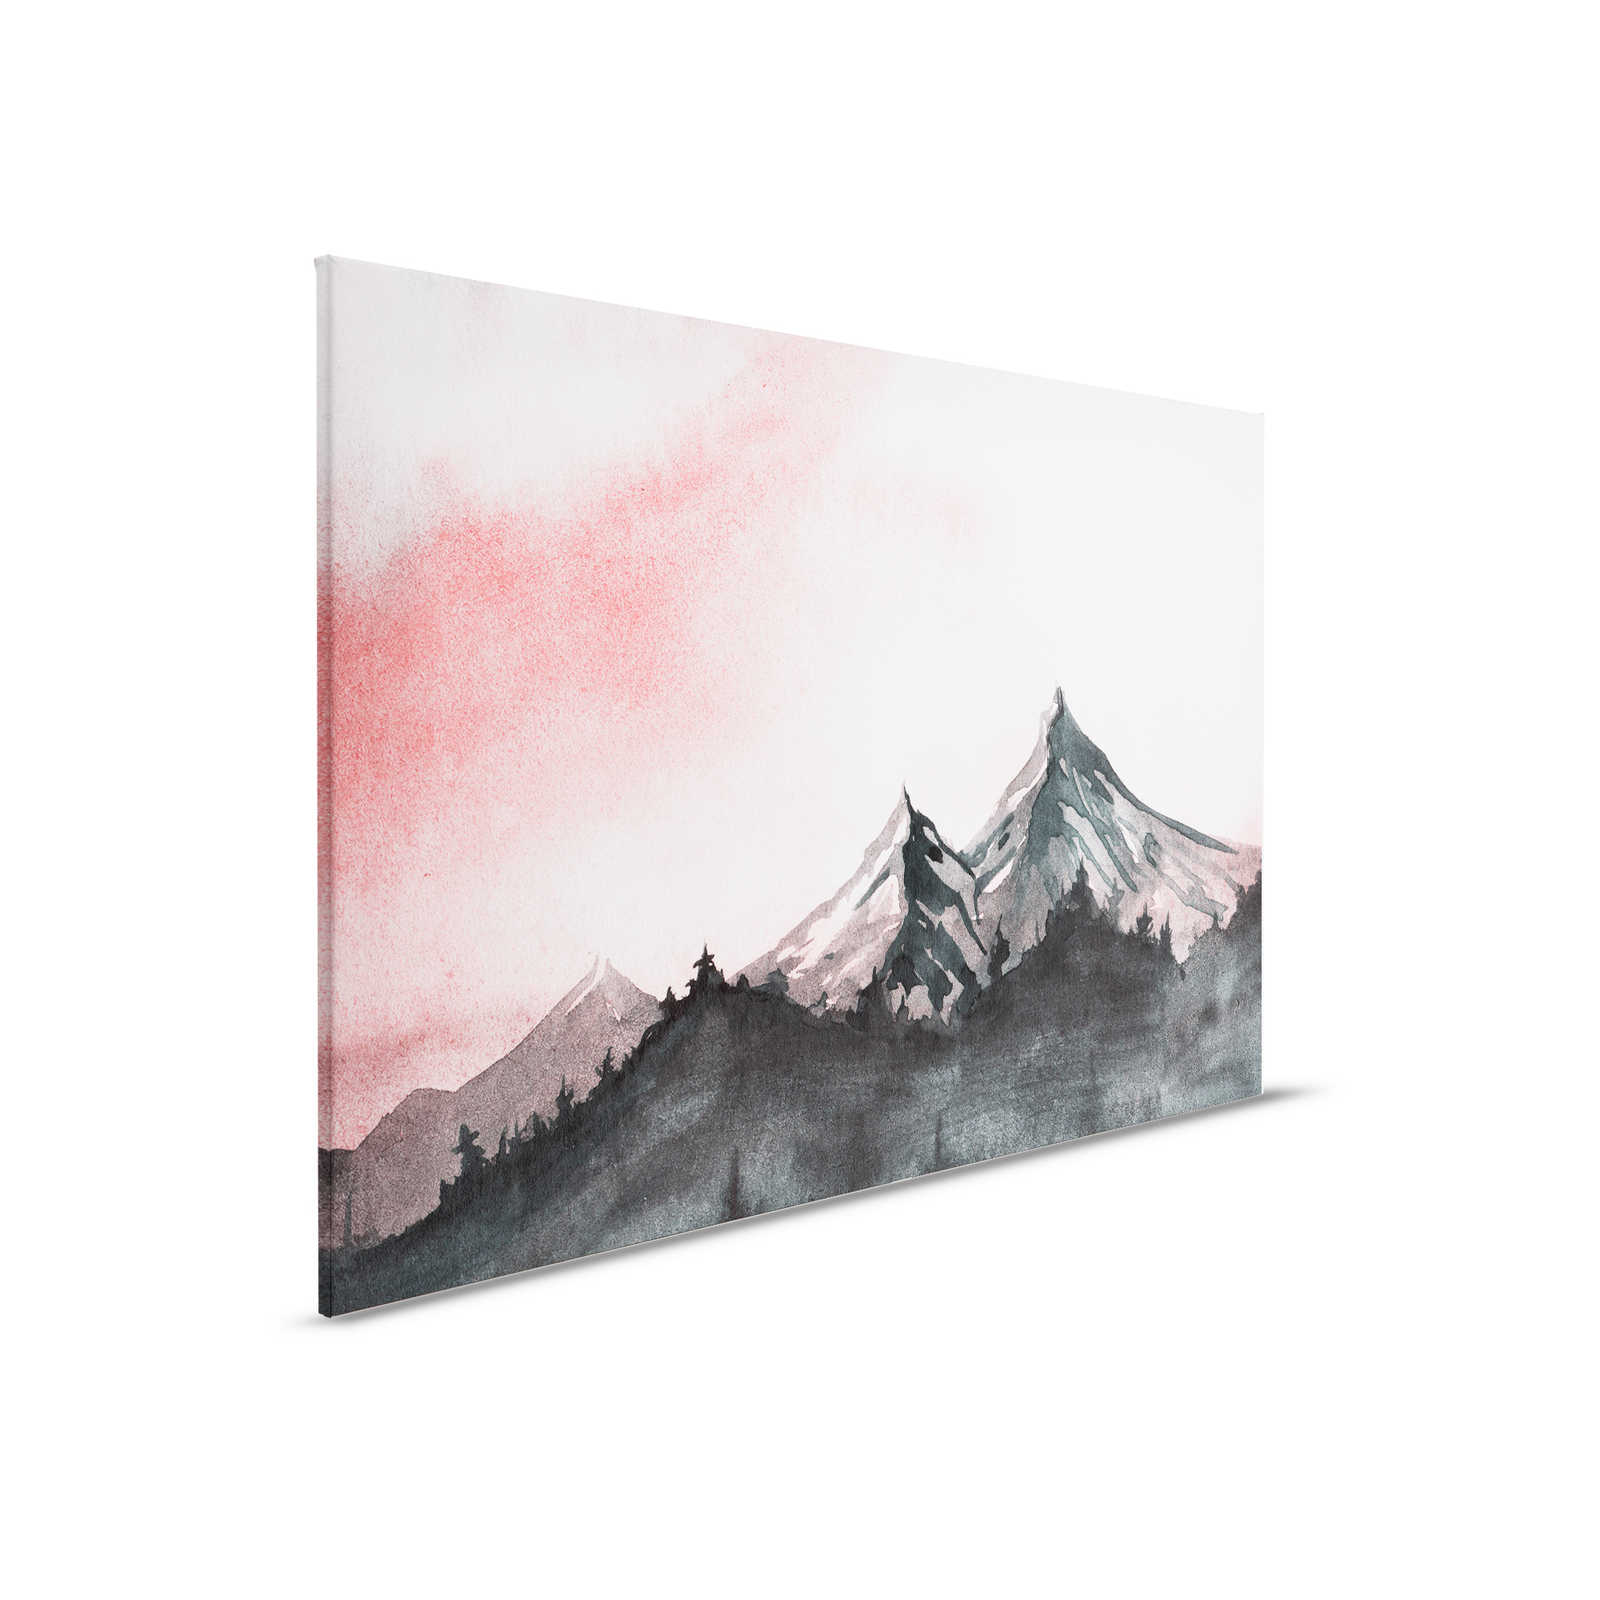         Canvas with mountain landscape in watercolour style - 0.90 m x 0.60 m
    